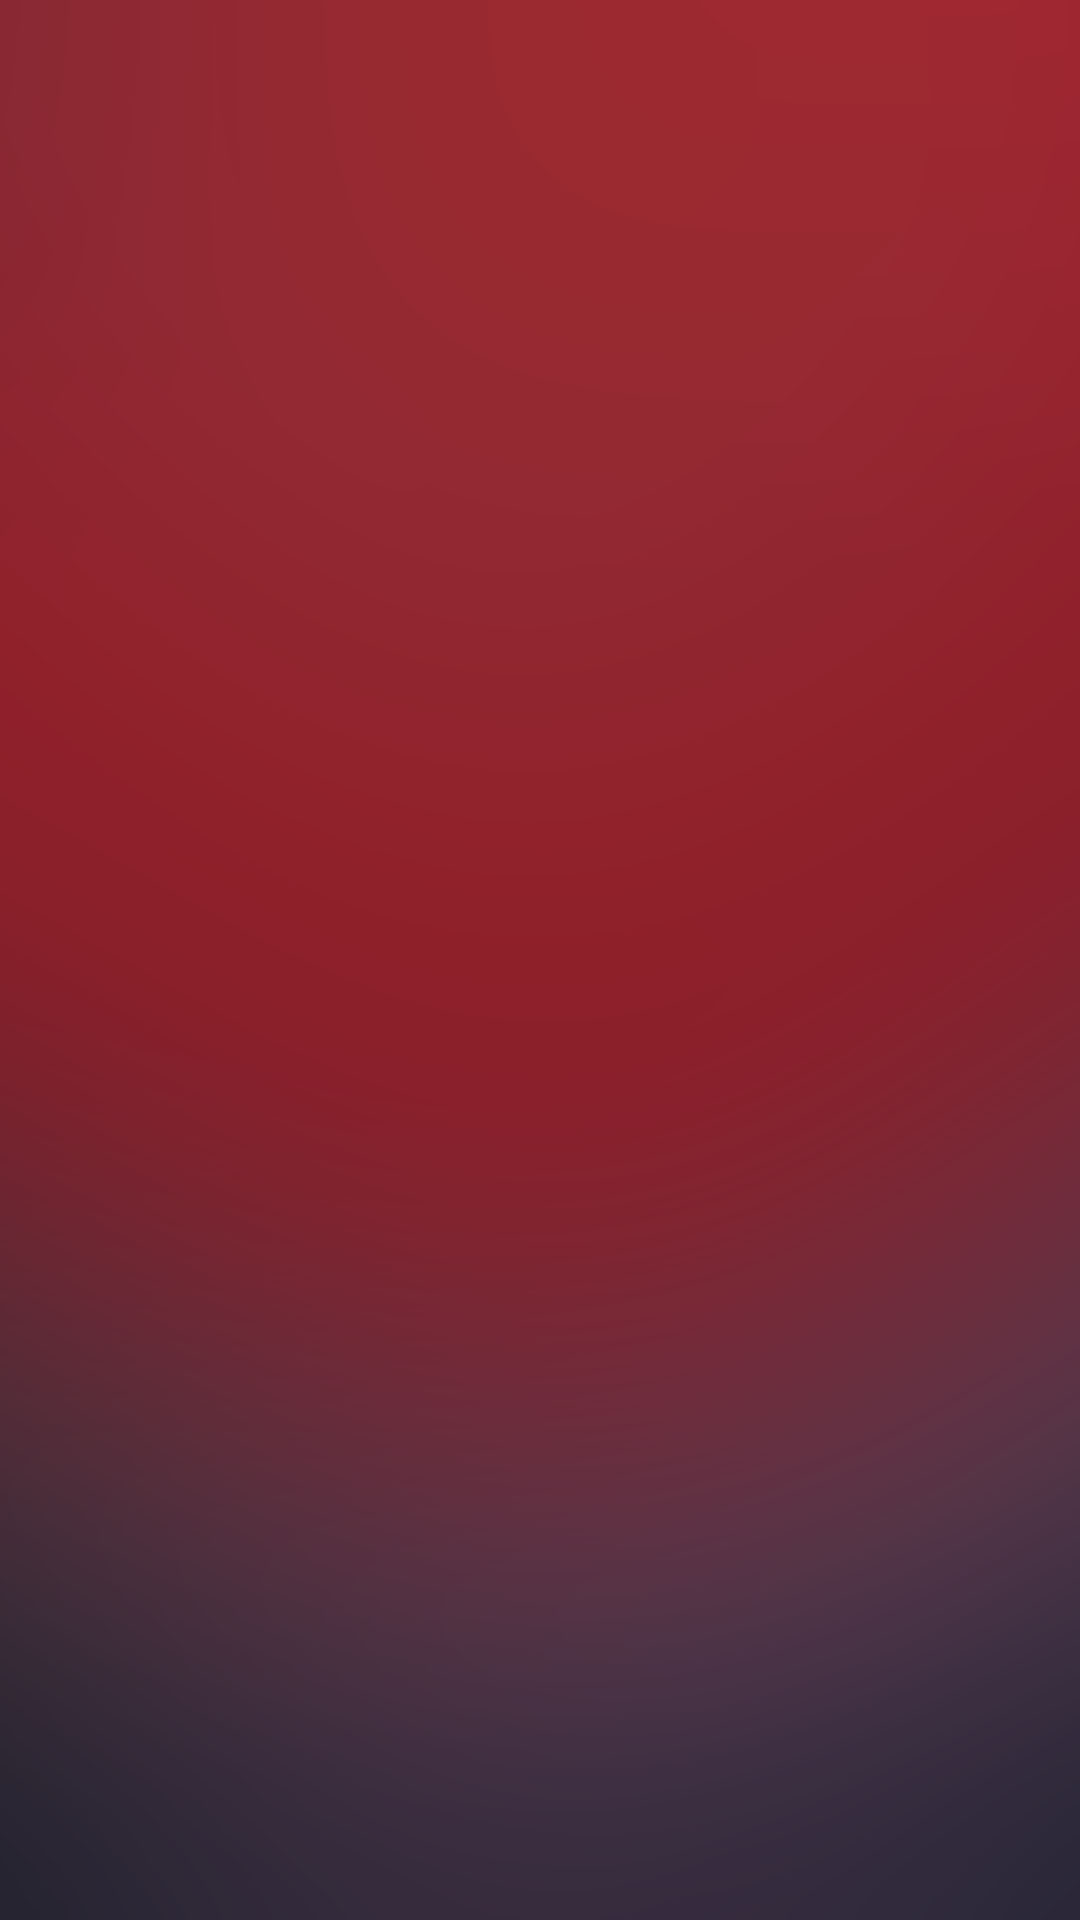 1080x1920 Dark Red Gradient Simple Android Wallpaper